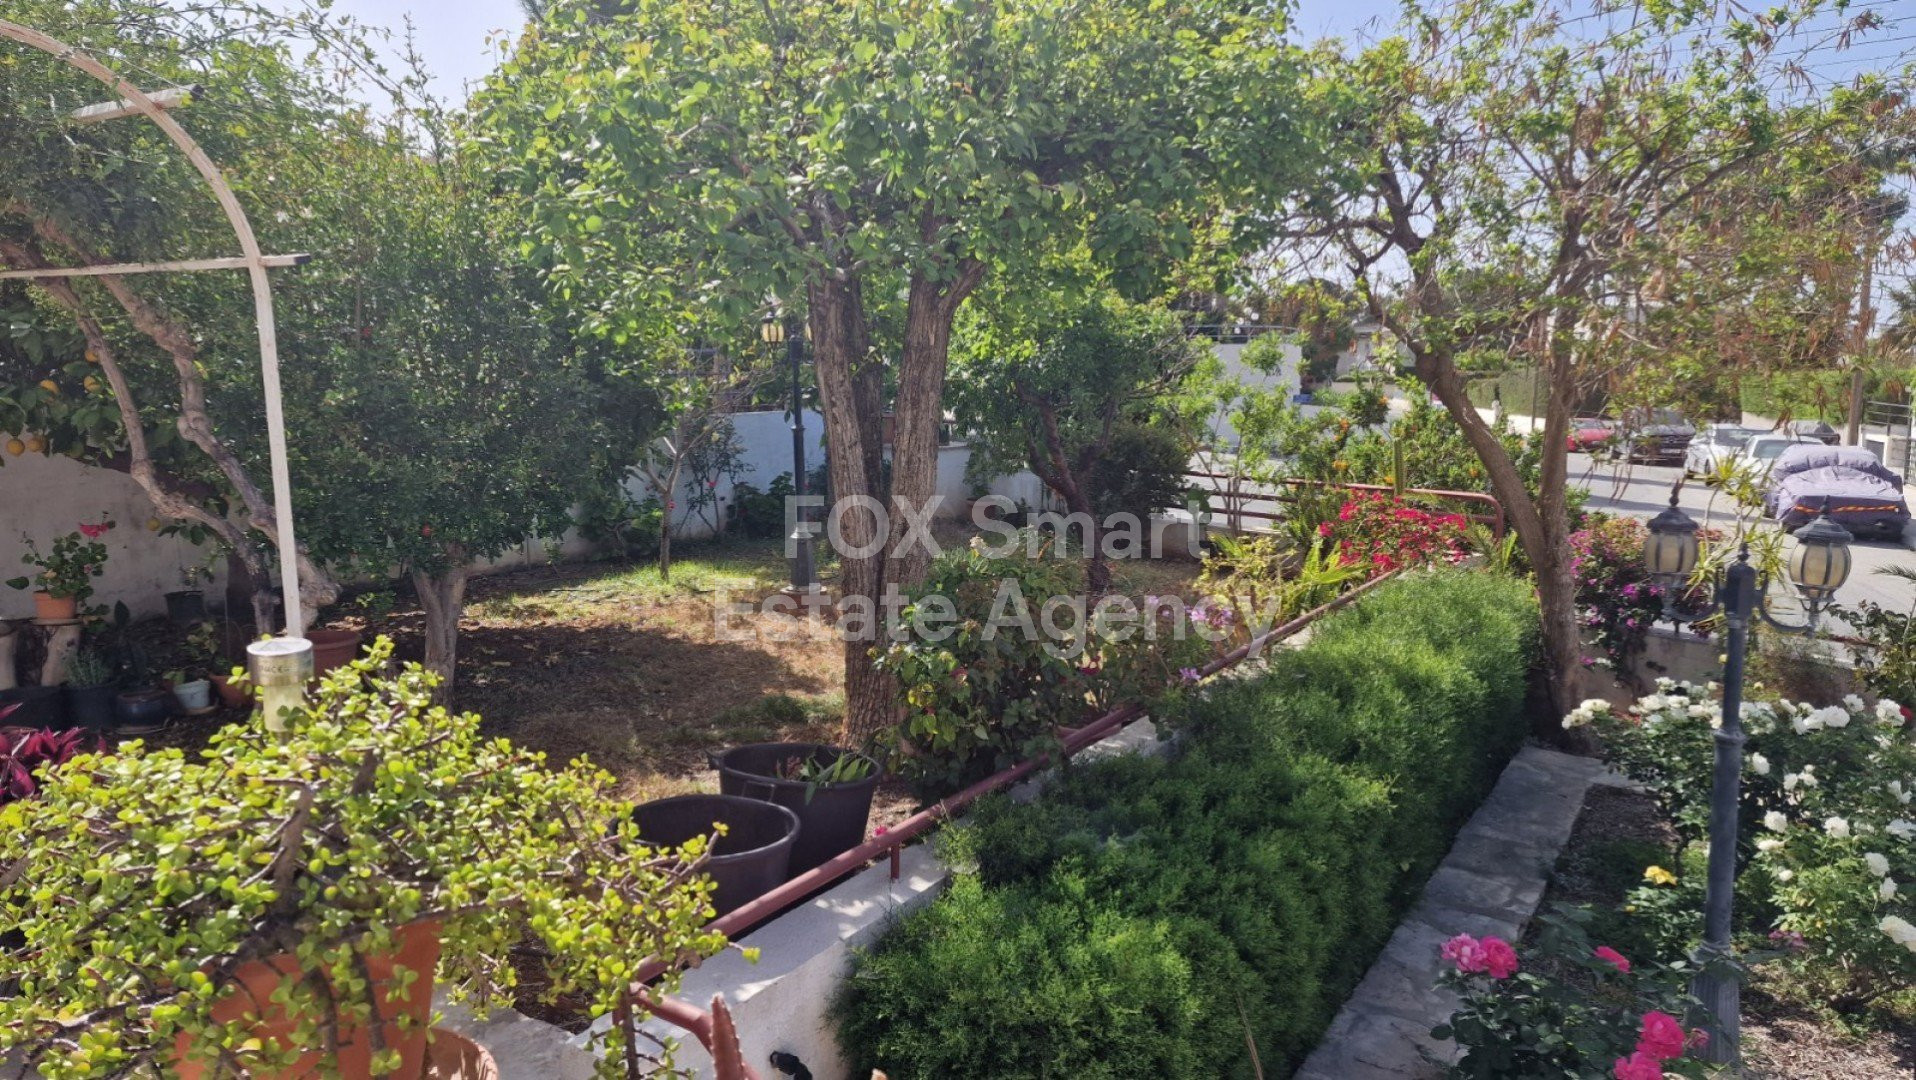 House, For Sale, Limassol, Agios Tychon  4 Bedrooms 3 Bathro.....